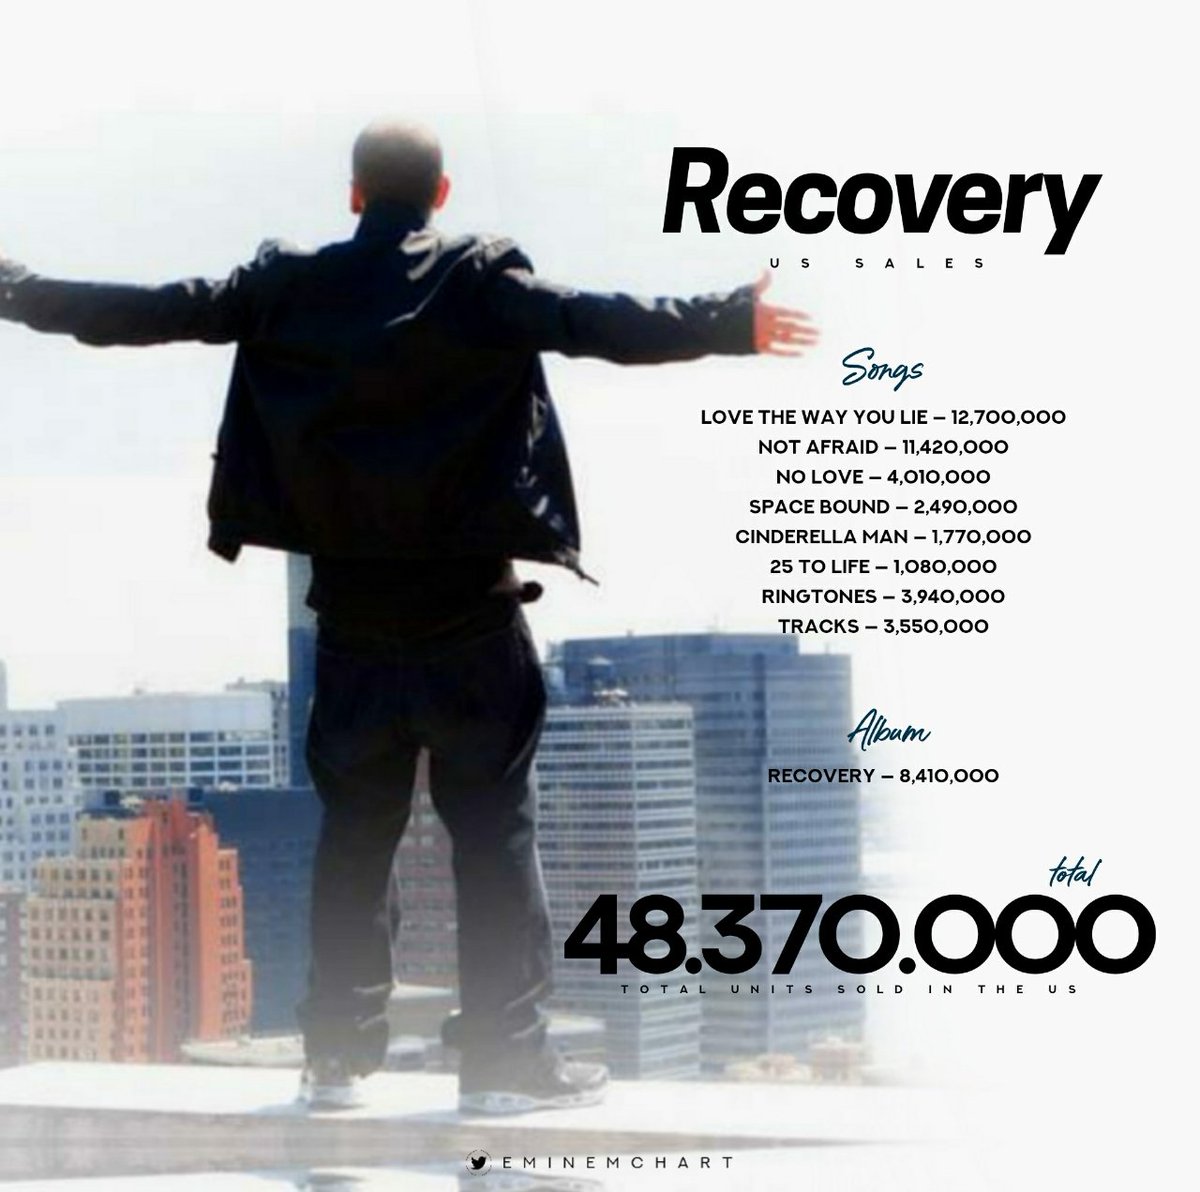 Eminem Charts on X: Recovery was the FIRST album with 2 DIAMOND